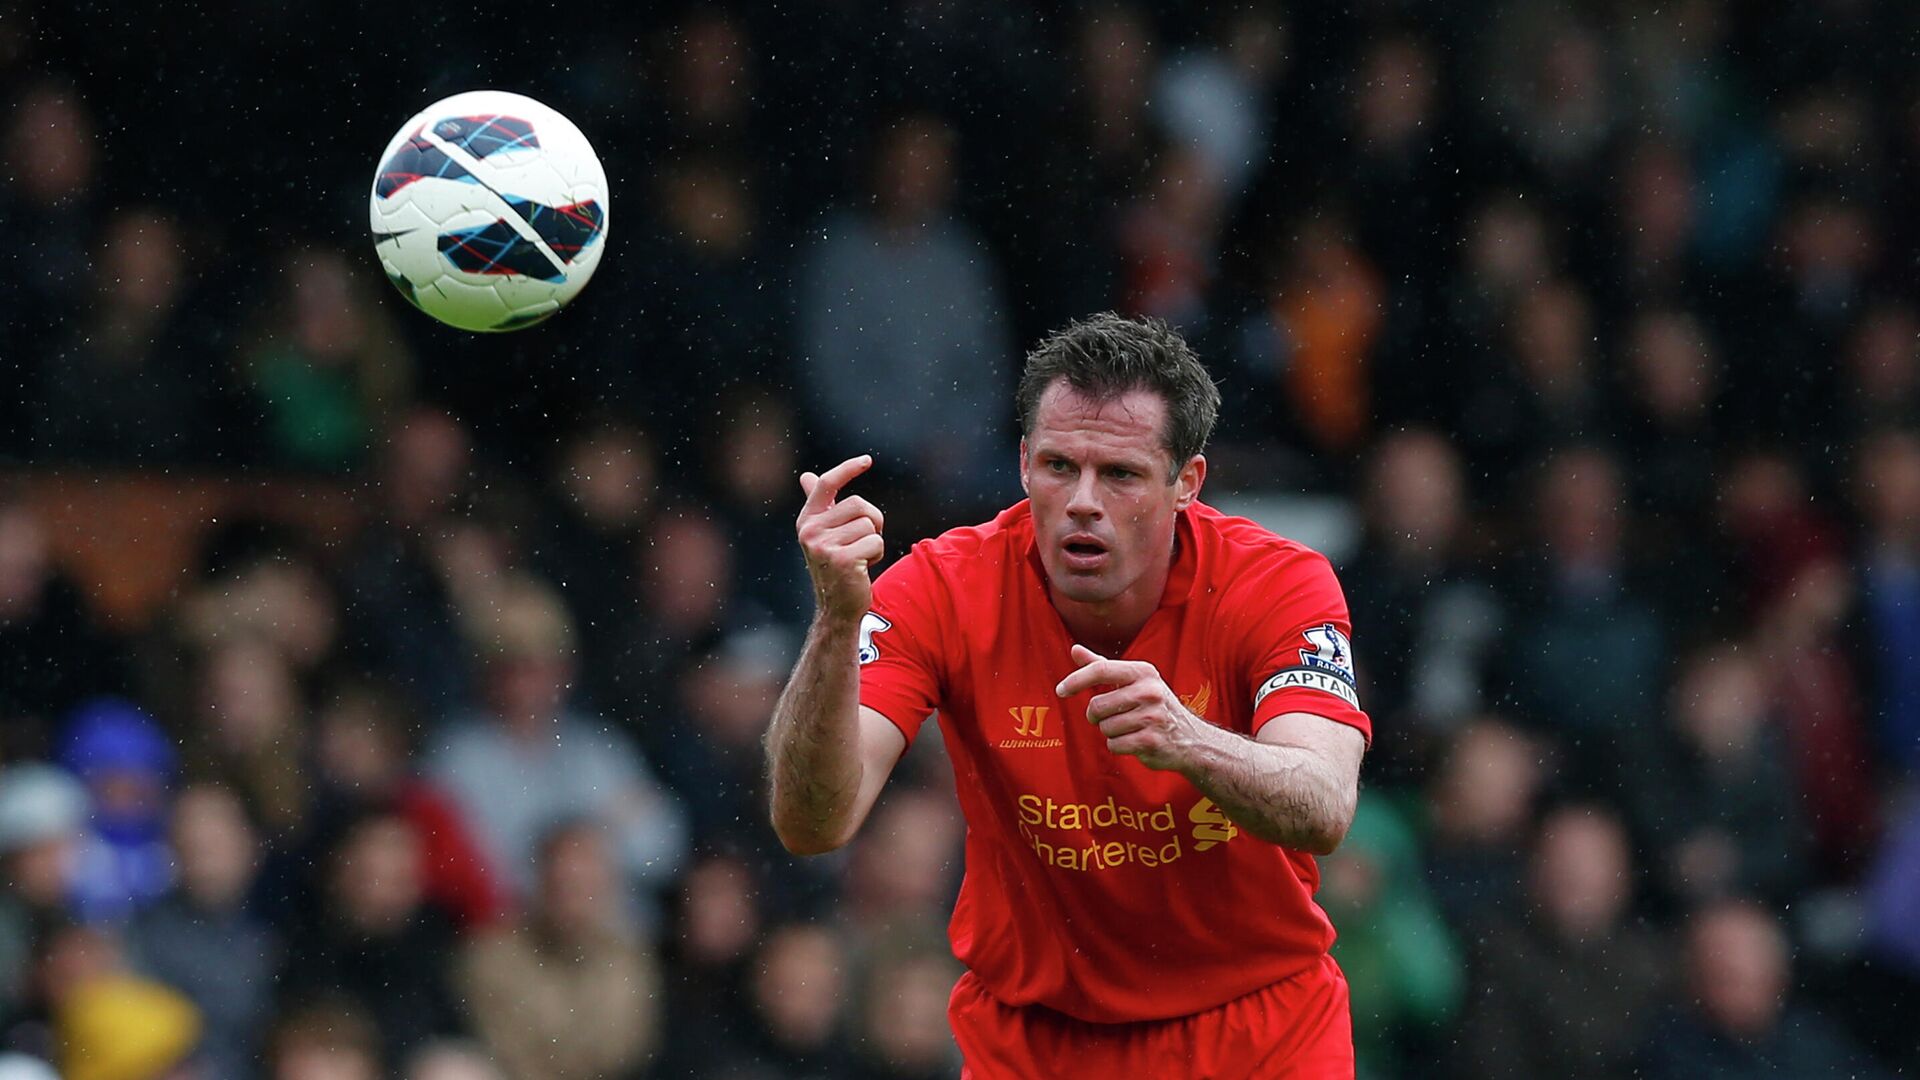 Liverpool's Jamie Carragher plays against Fulham during their English Premier League soccer match at Craven Cottage, London, Sunday, May 12, 2013 - Sputnik International, 1920, 22.10.2021